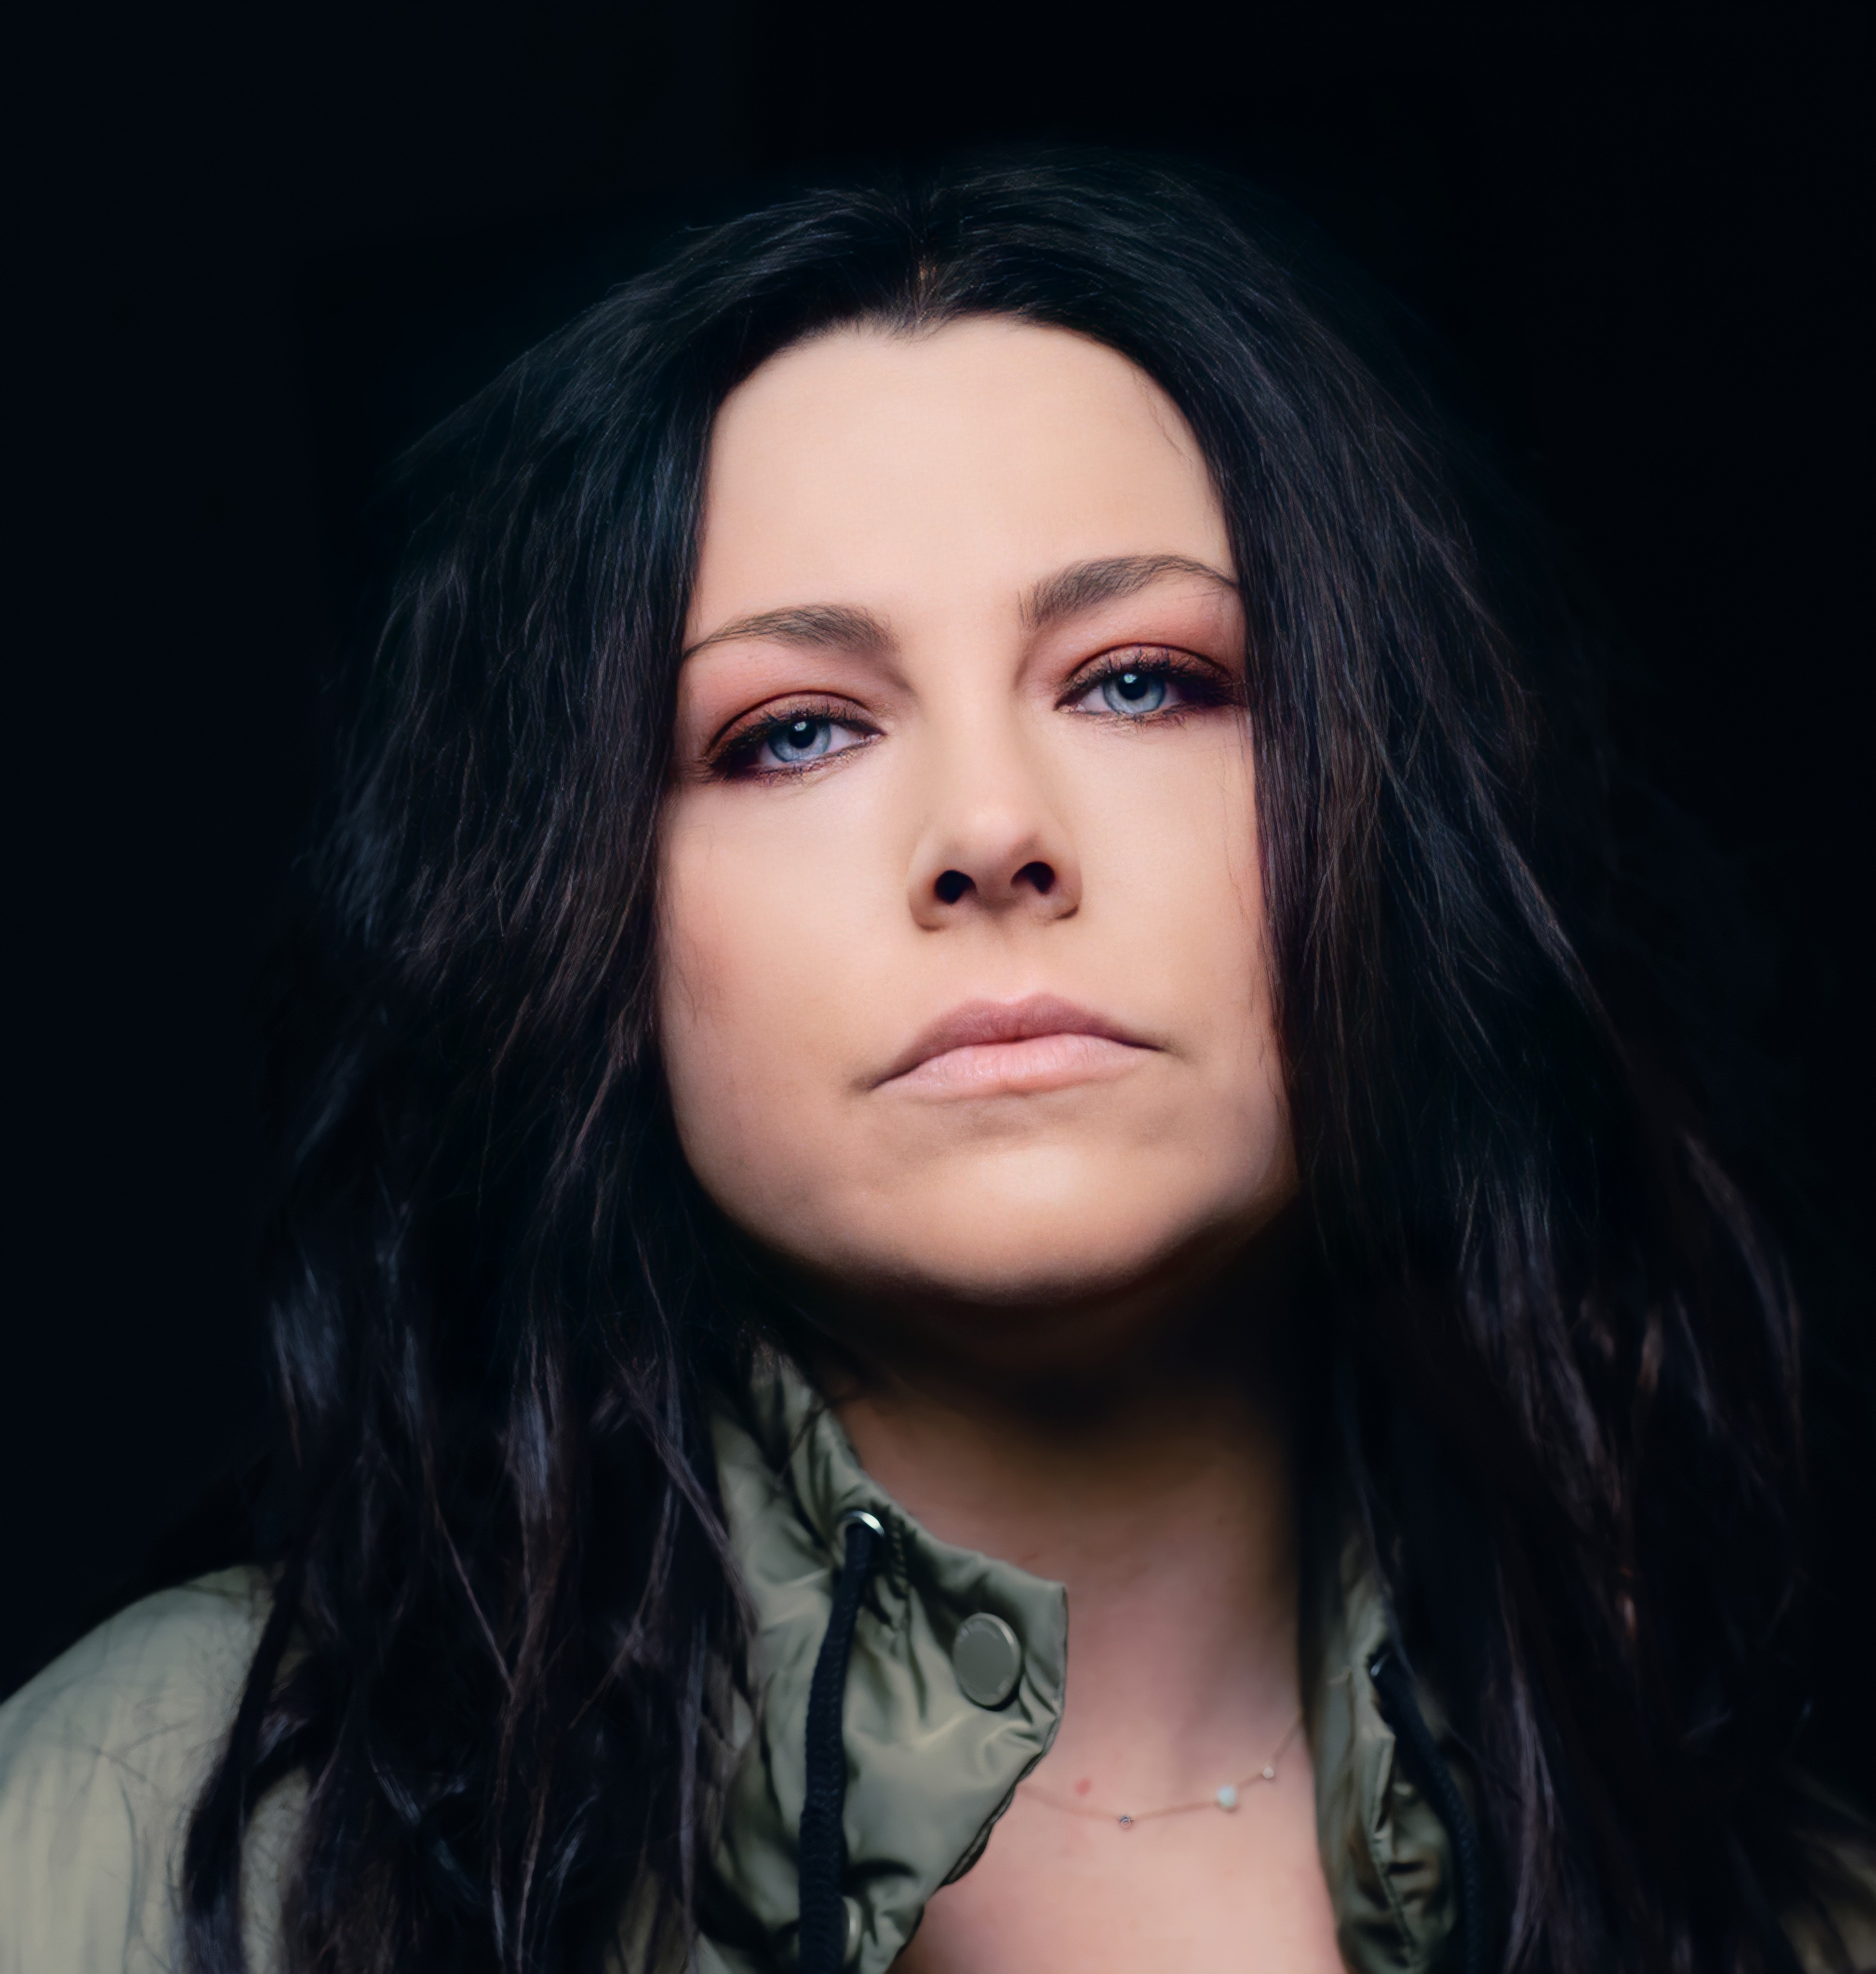 3892x4096
Keywords: amy lee;photoshoot;the bitter truth;hq